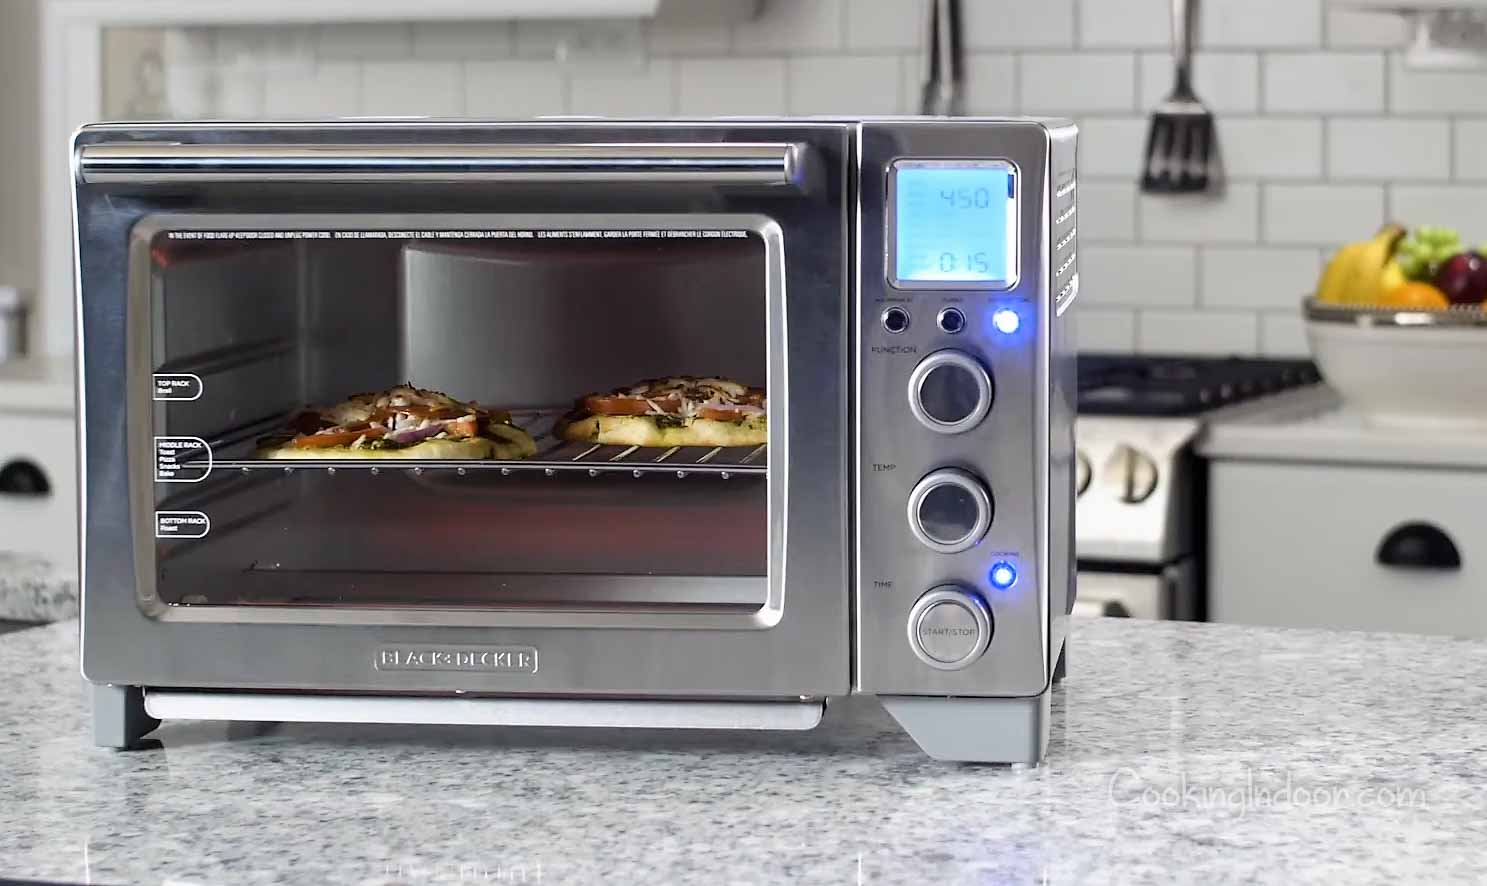 The 6 Best Countertop Toaster Ovens in 2021 According to Experts